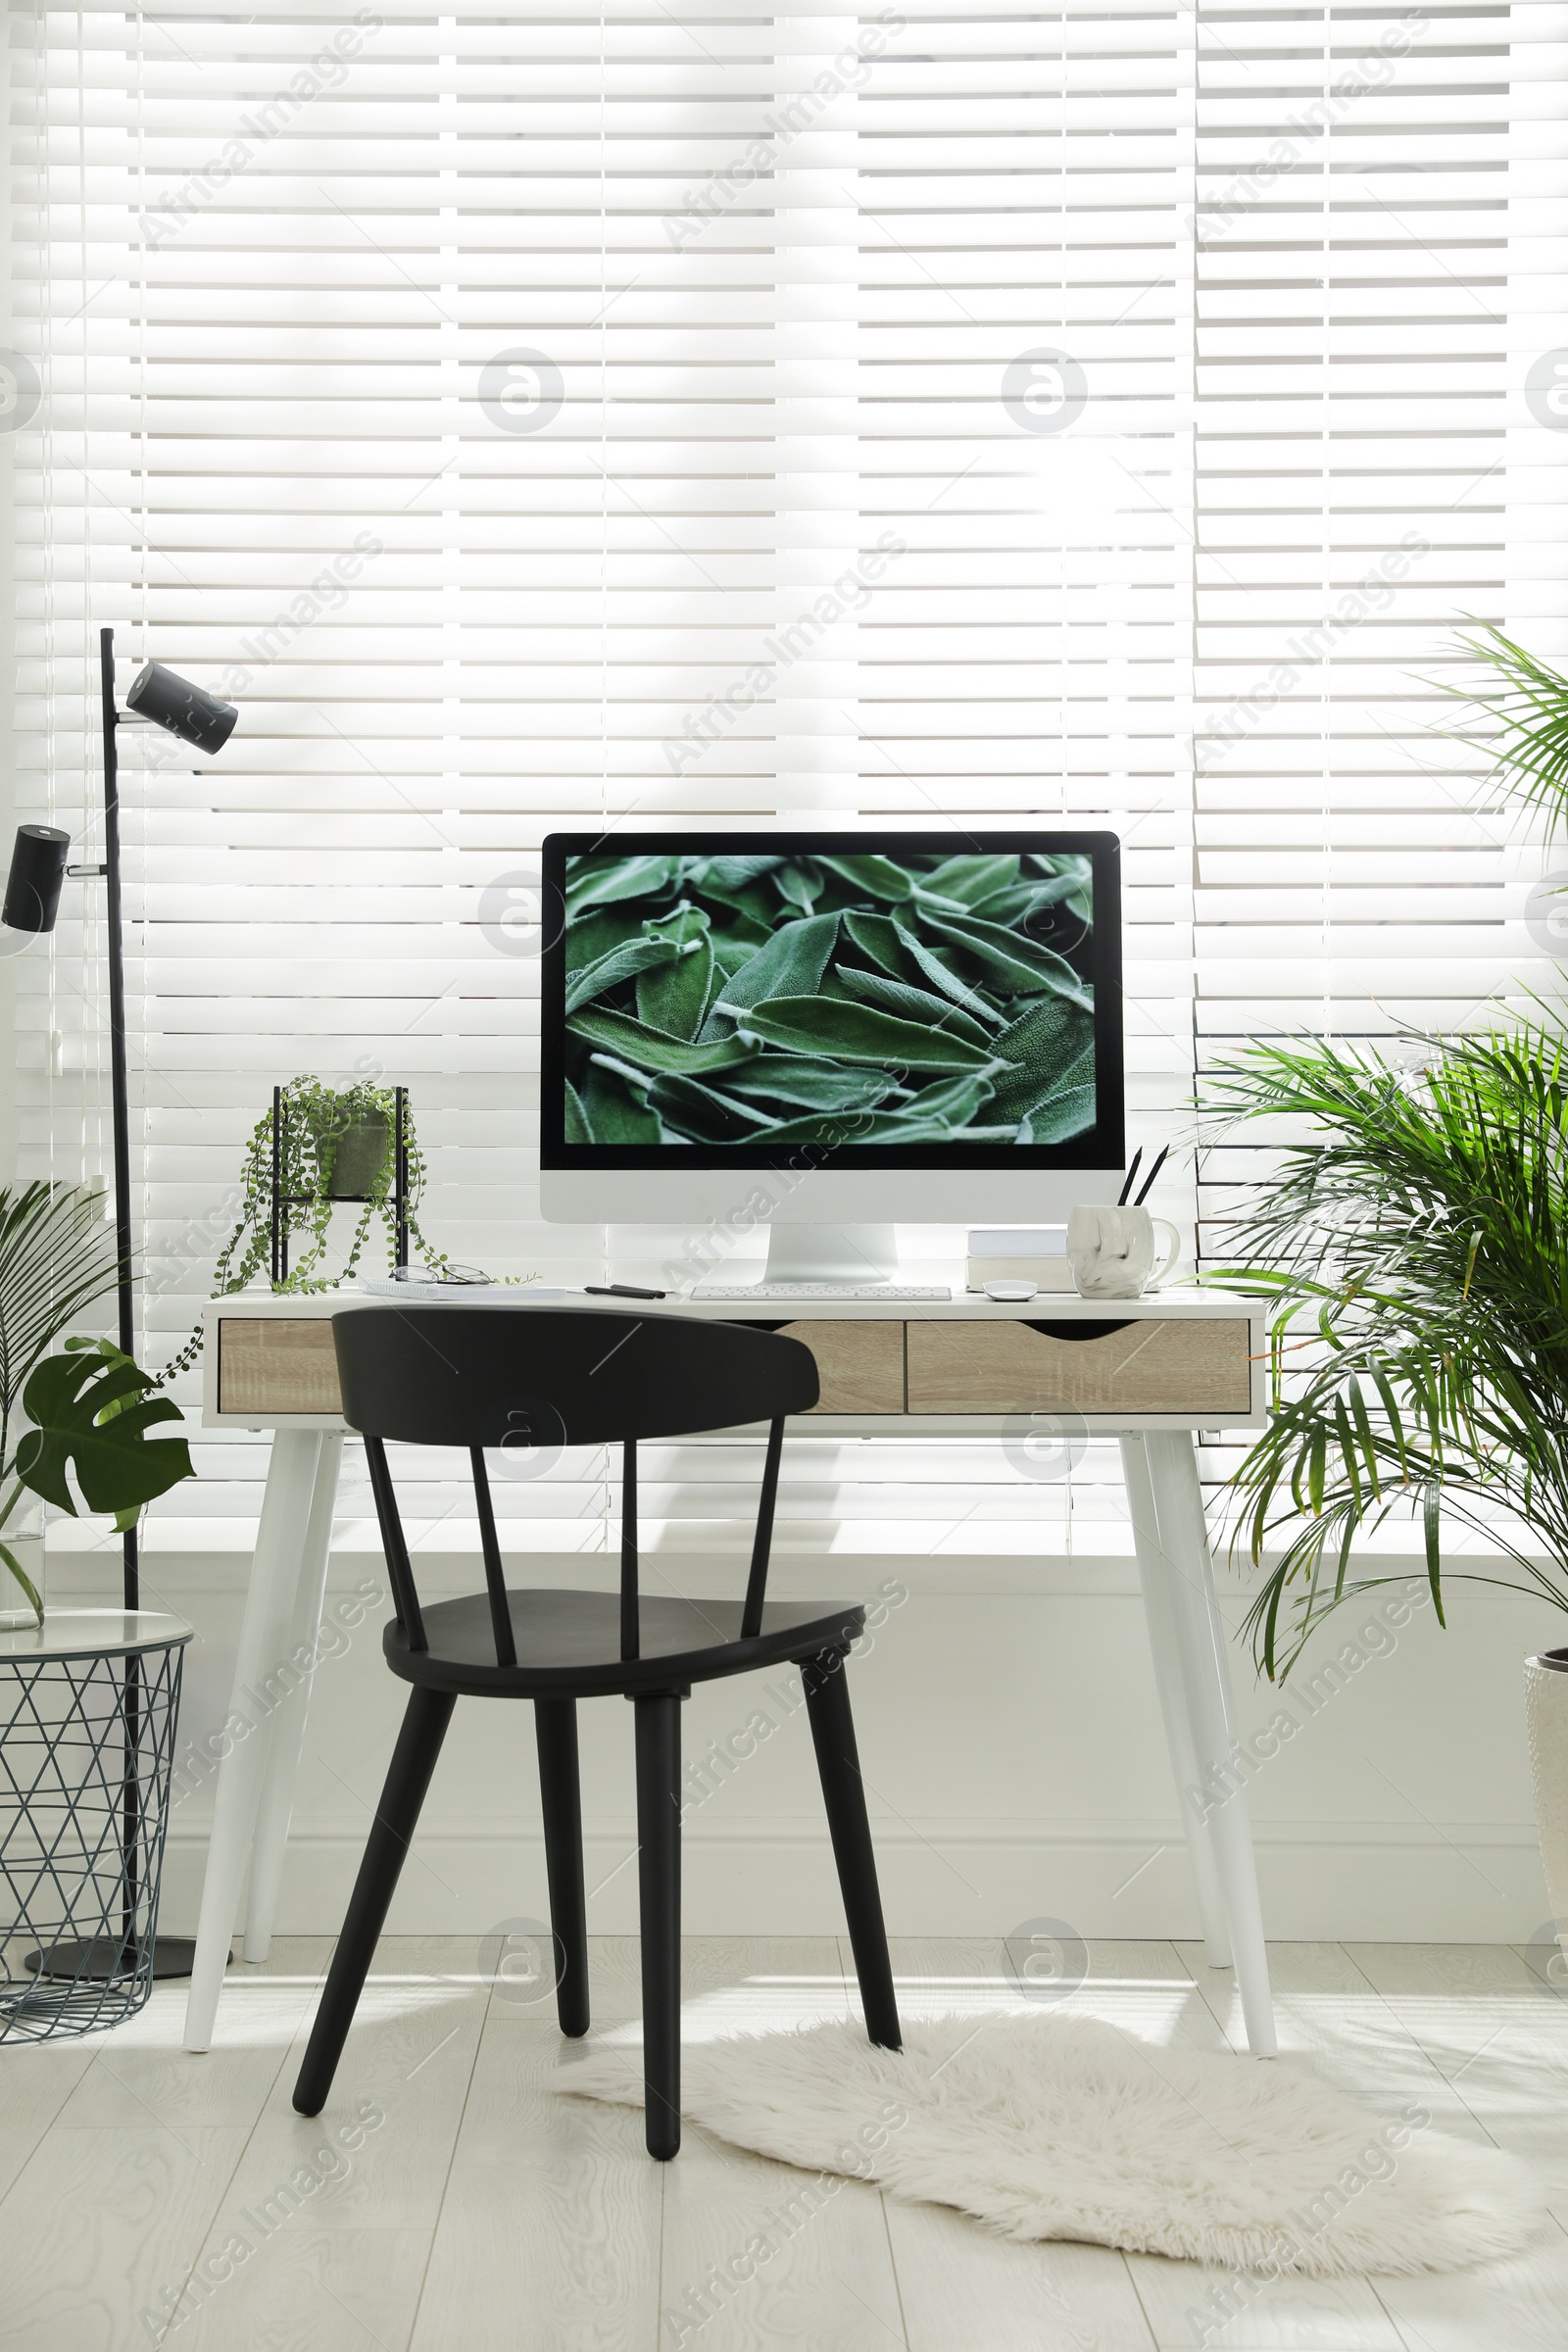 Photo of Comfortable workplace with modern computer and green plants in room. Interior design